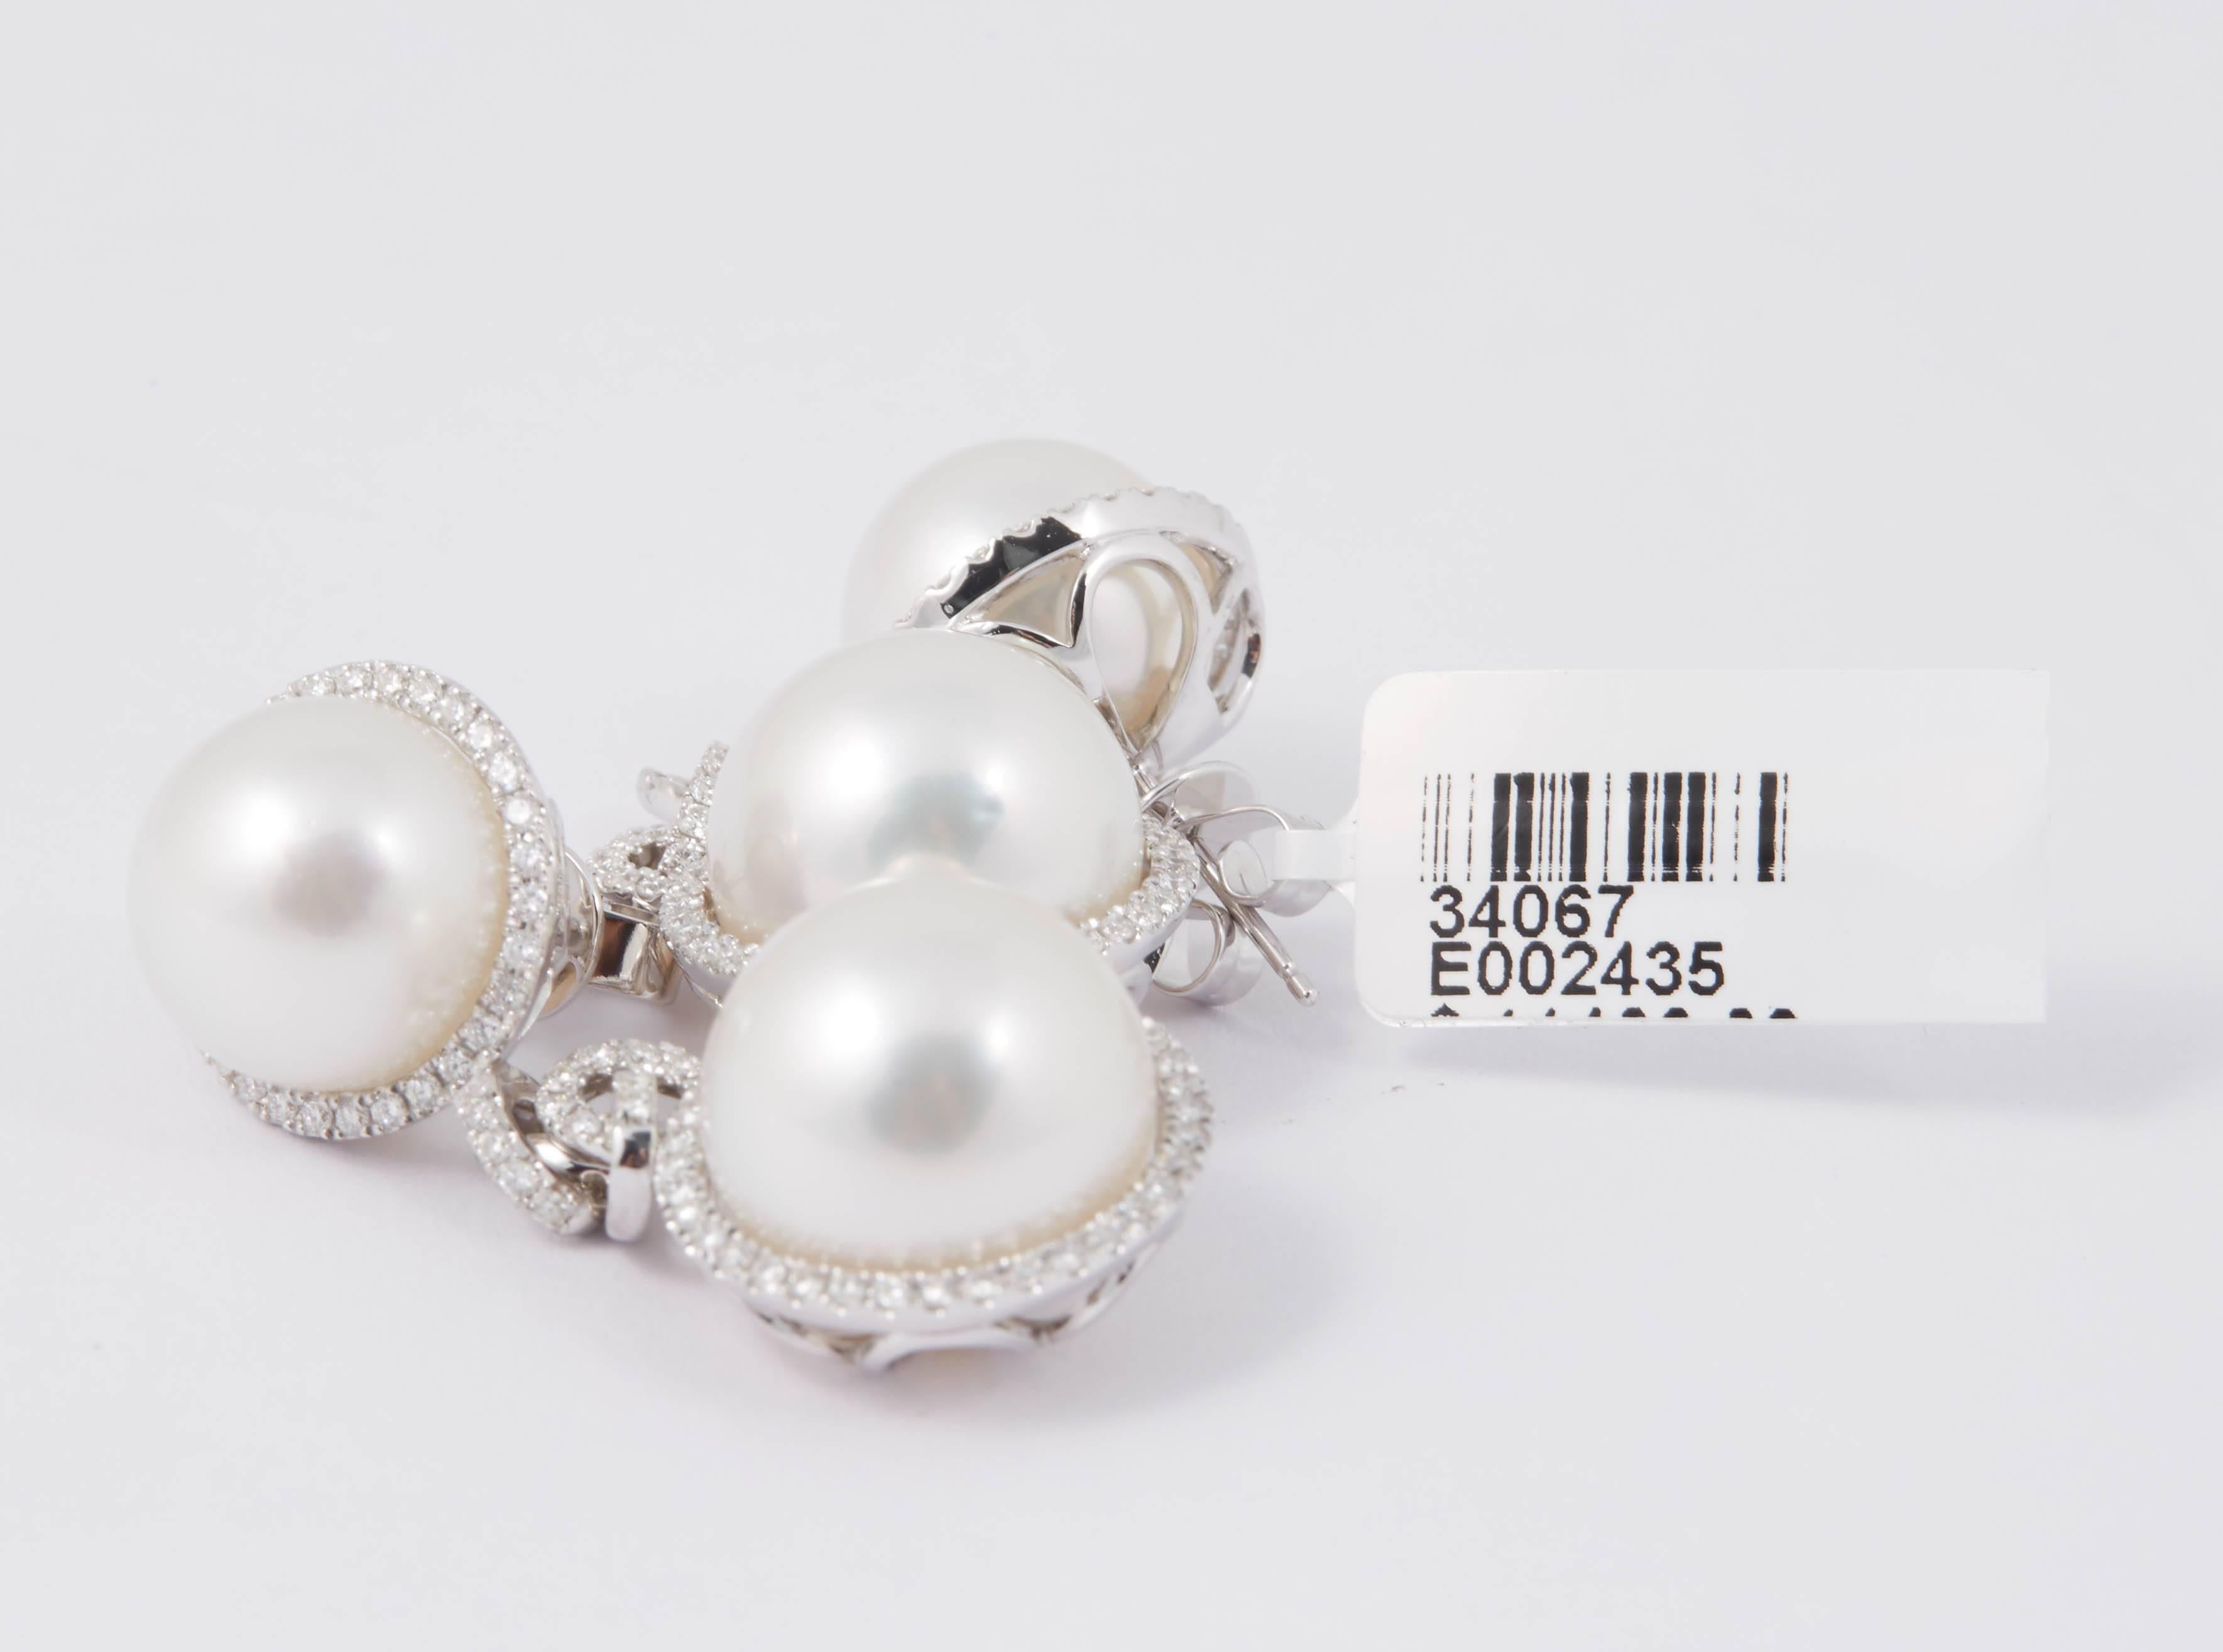 18K White Gold
South Sea Pearl 12-14mm each
1.40 Cts Diamonds